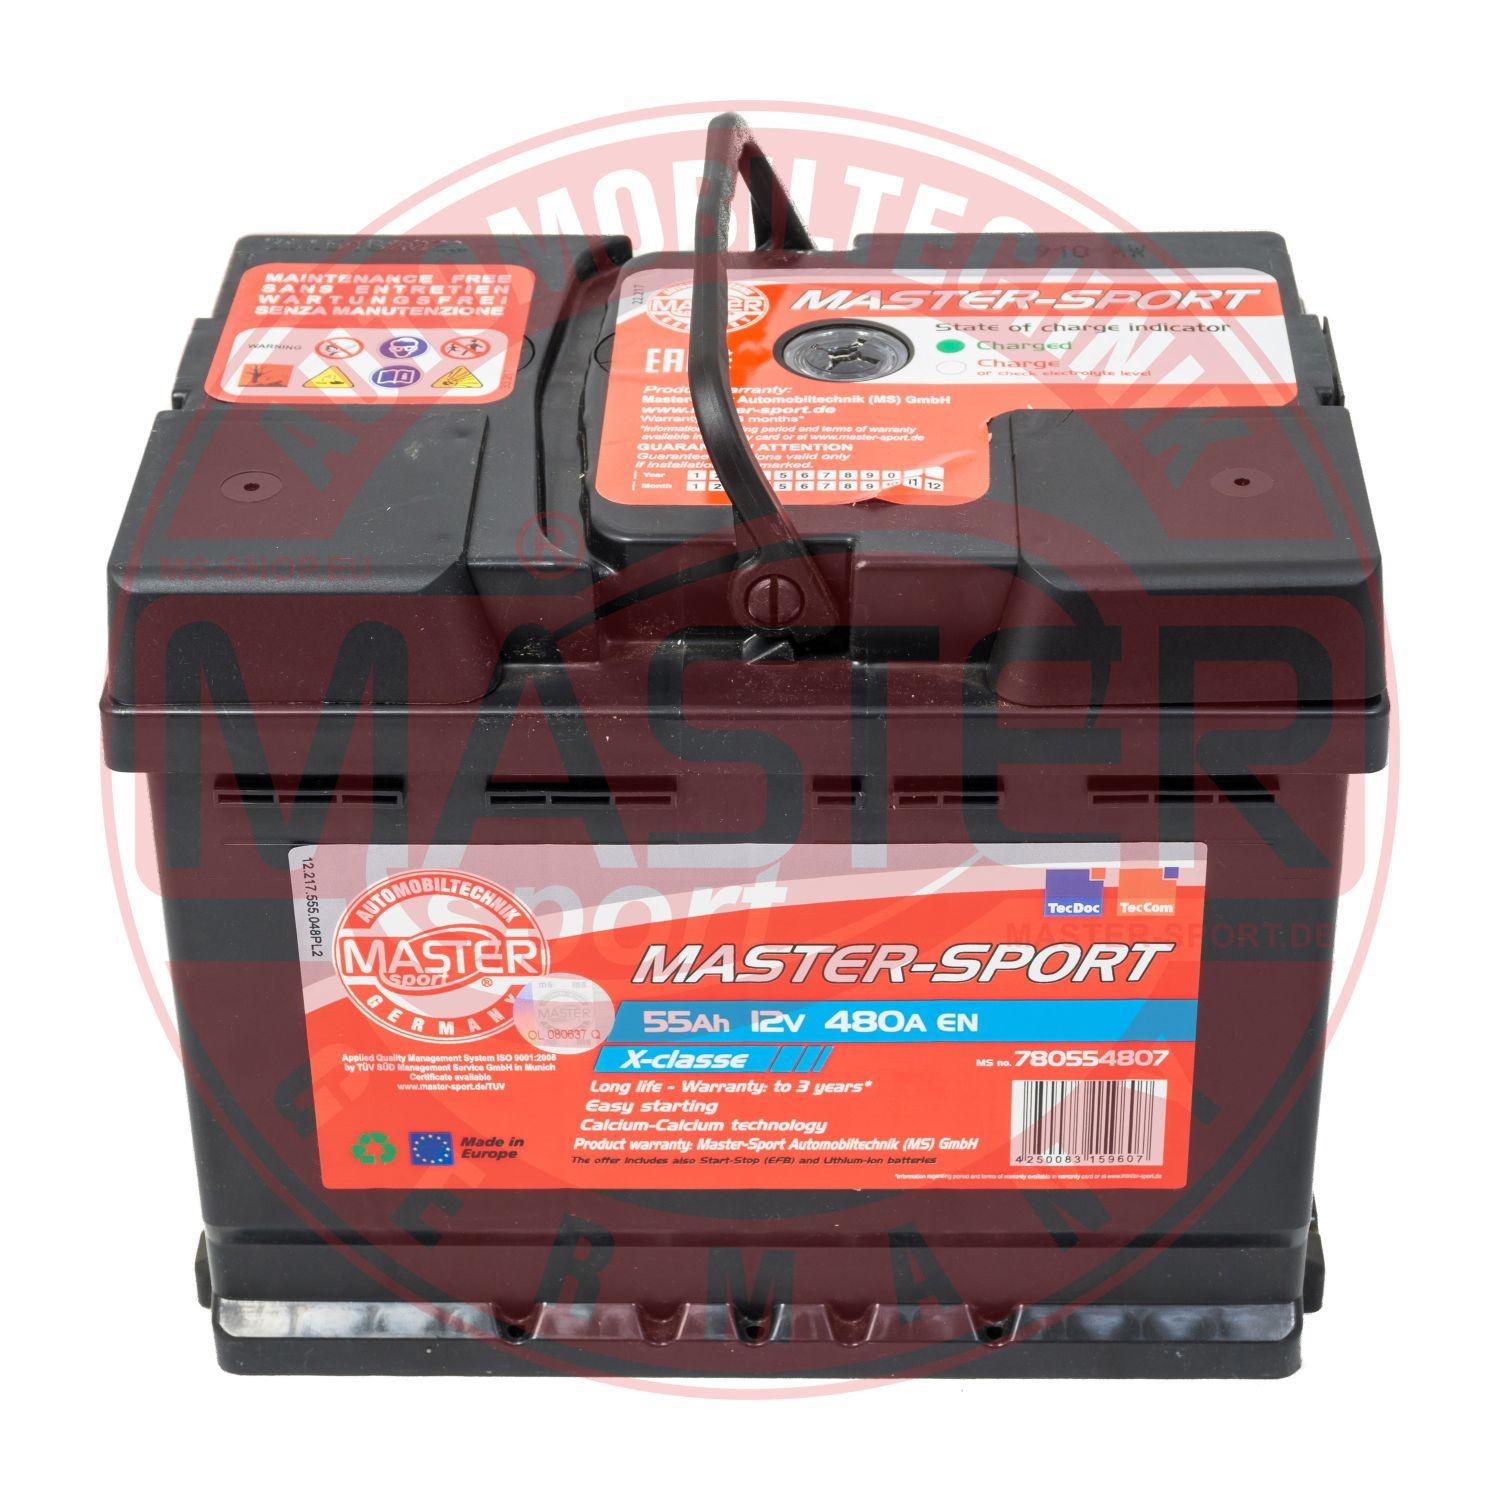 MASTER-SPORT 780554807 Battery KIA experience and price